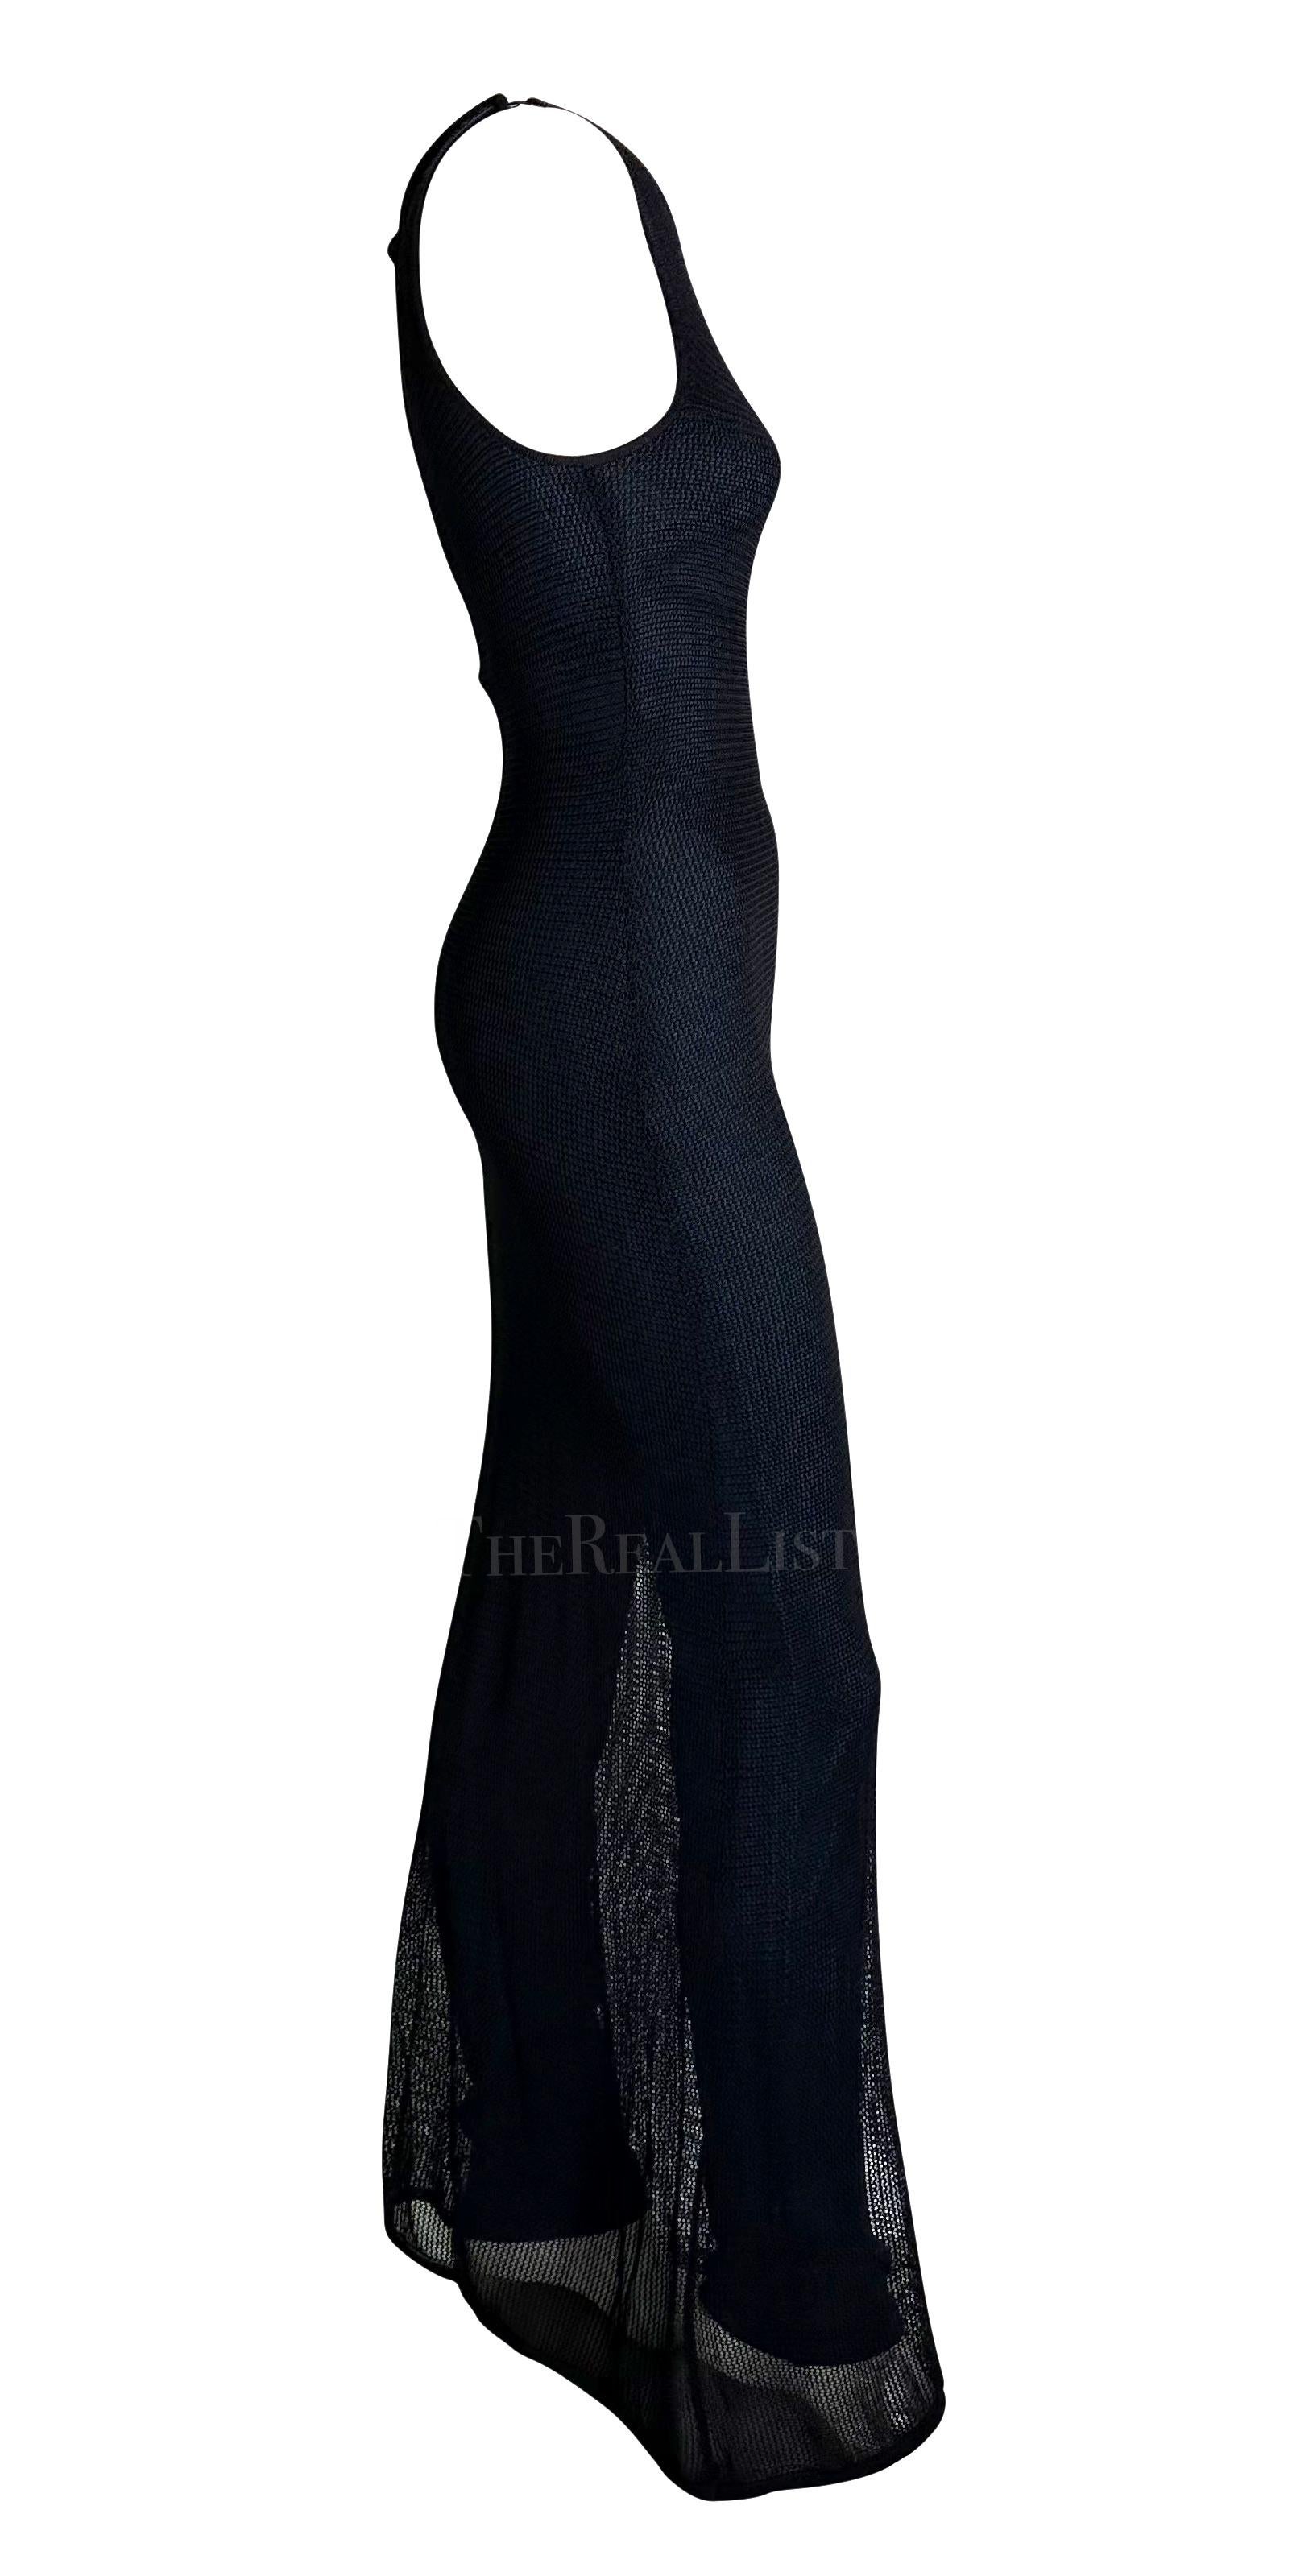 F/W 1997 Salvatore Ferragamo Runway Sheer Knit Catsuit Overlay Bodycon Gown For Sale 4